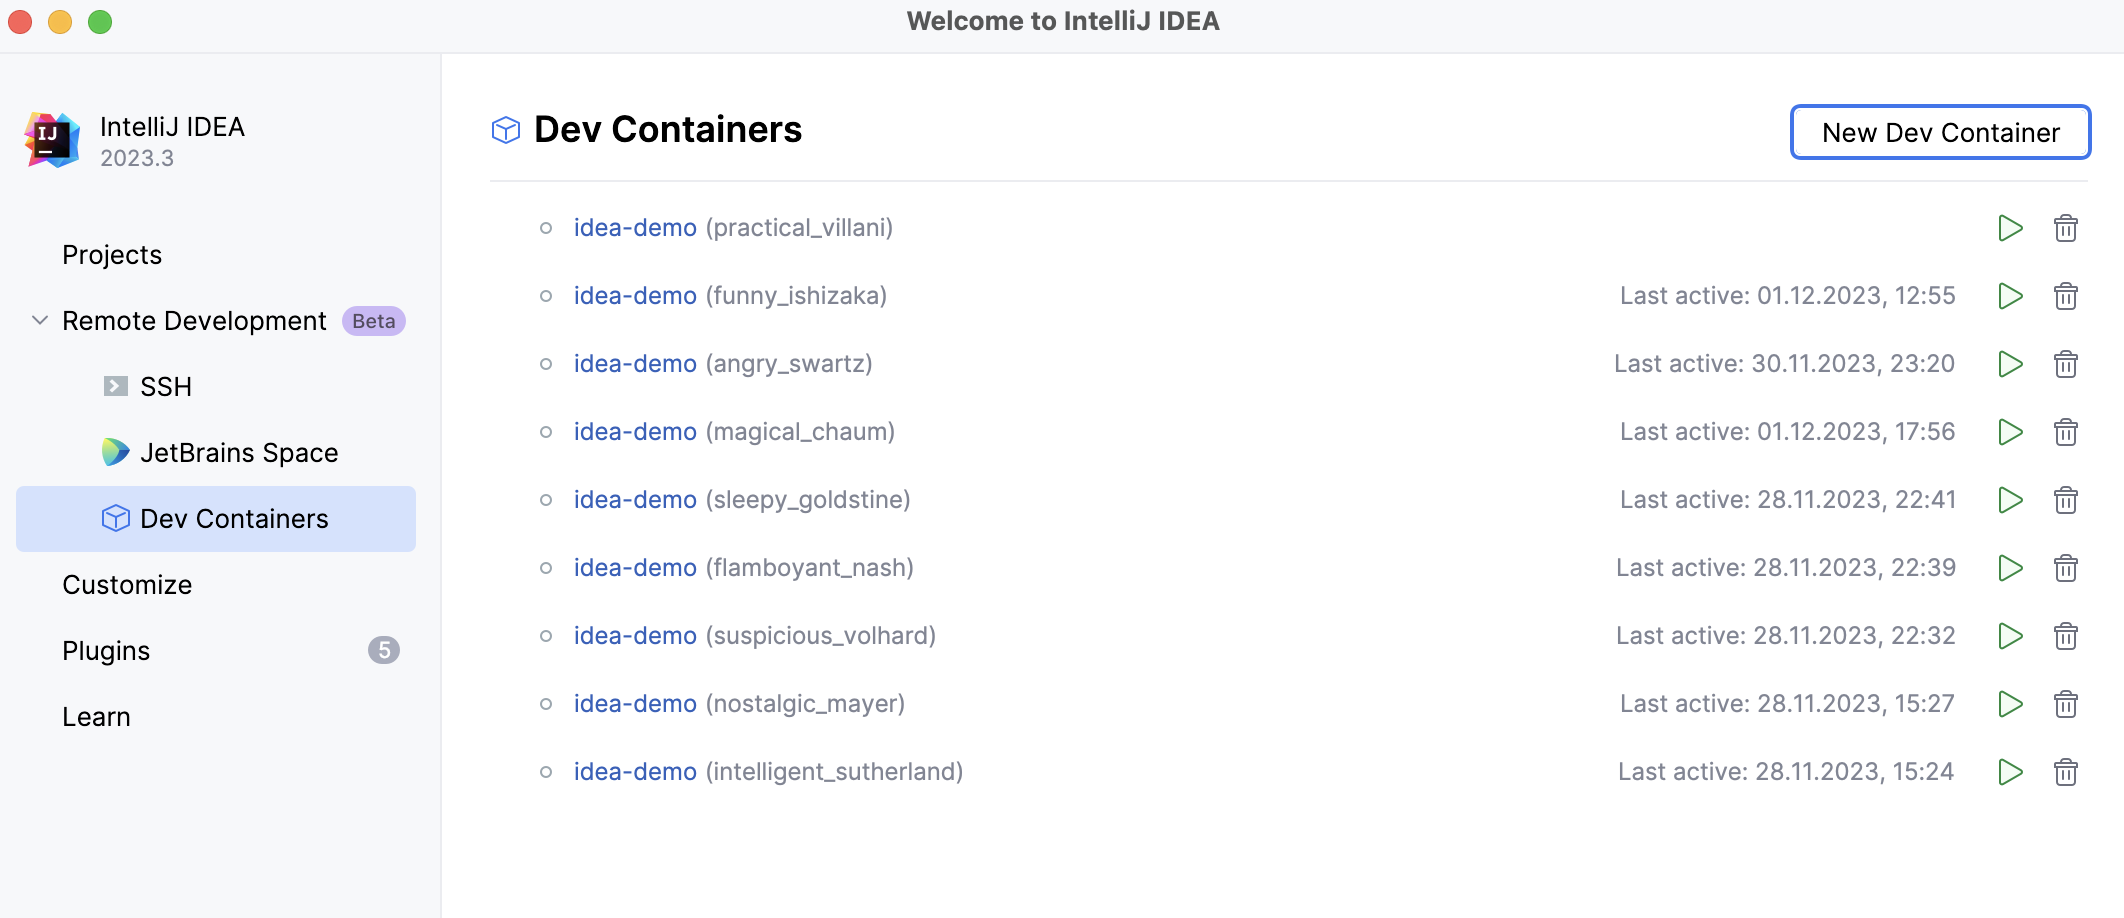 Dev Containers